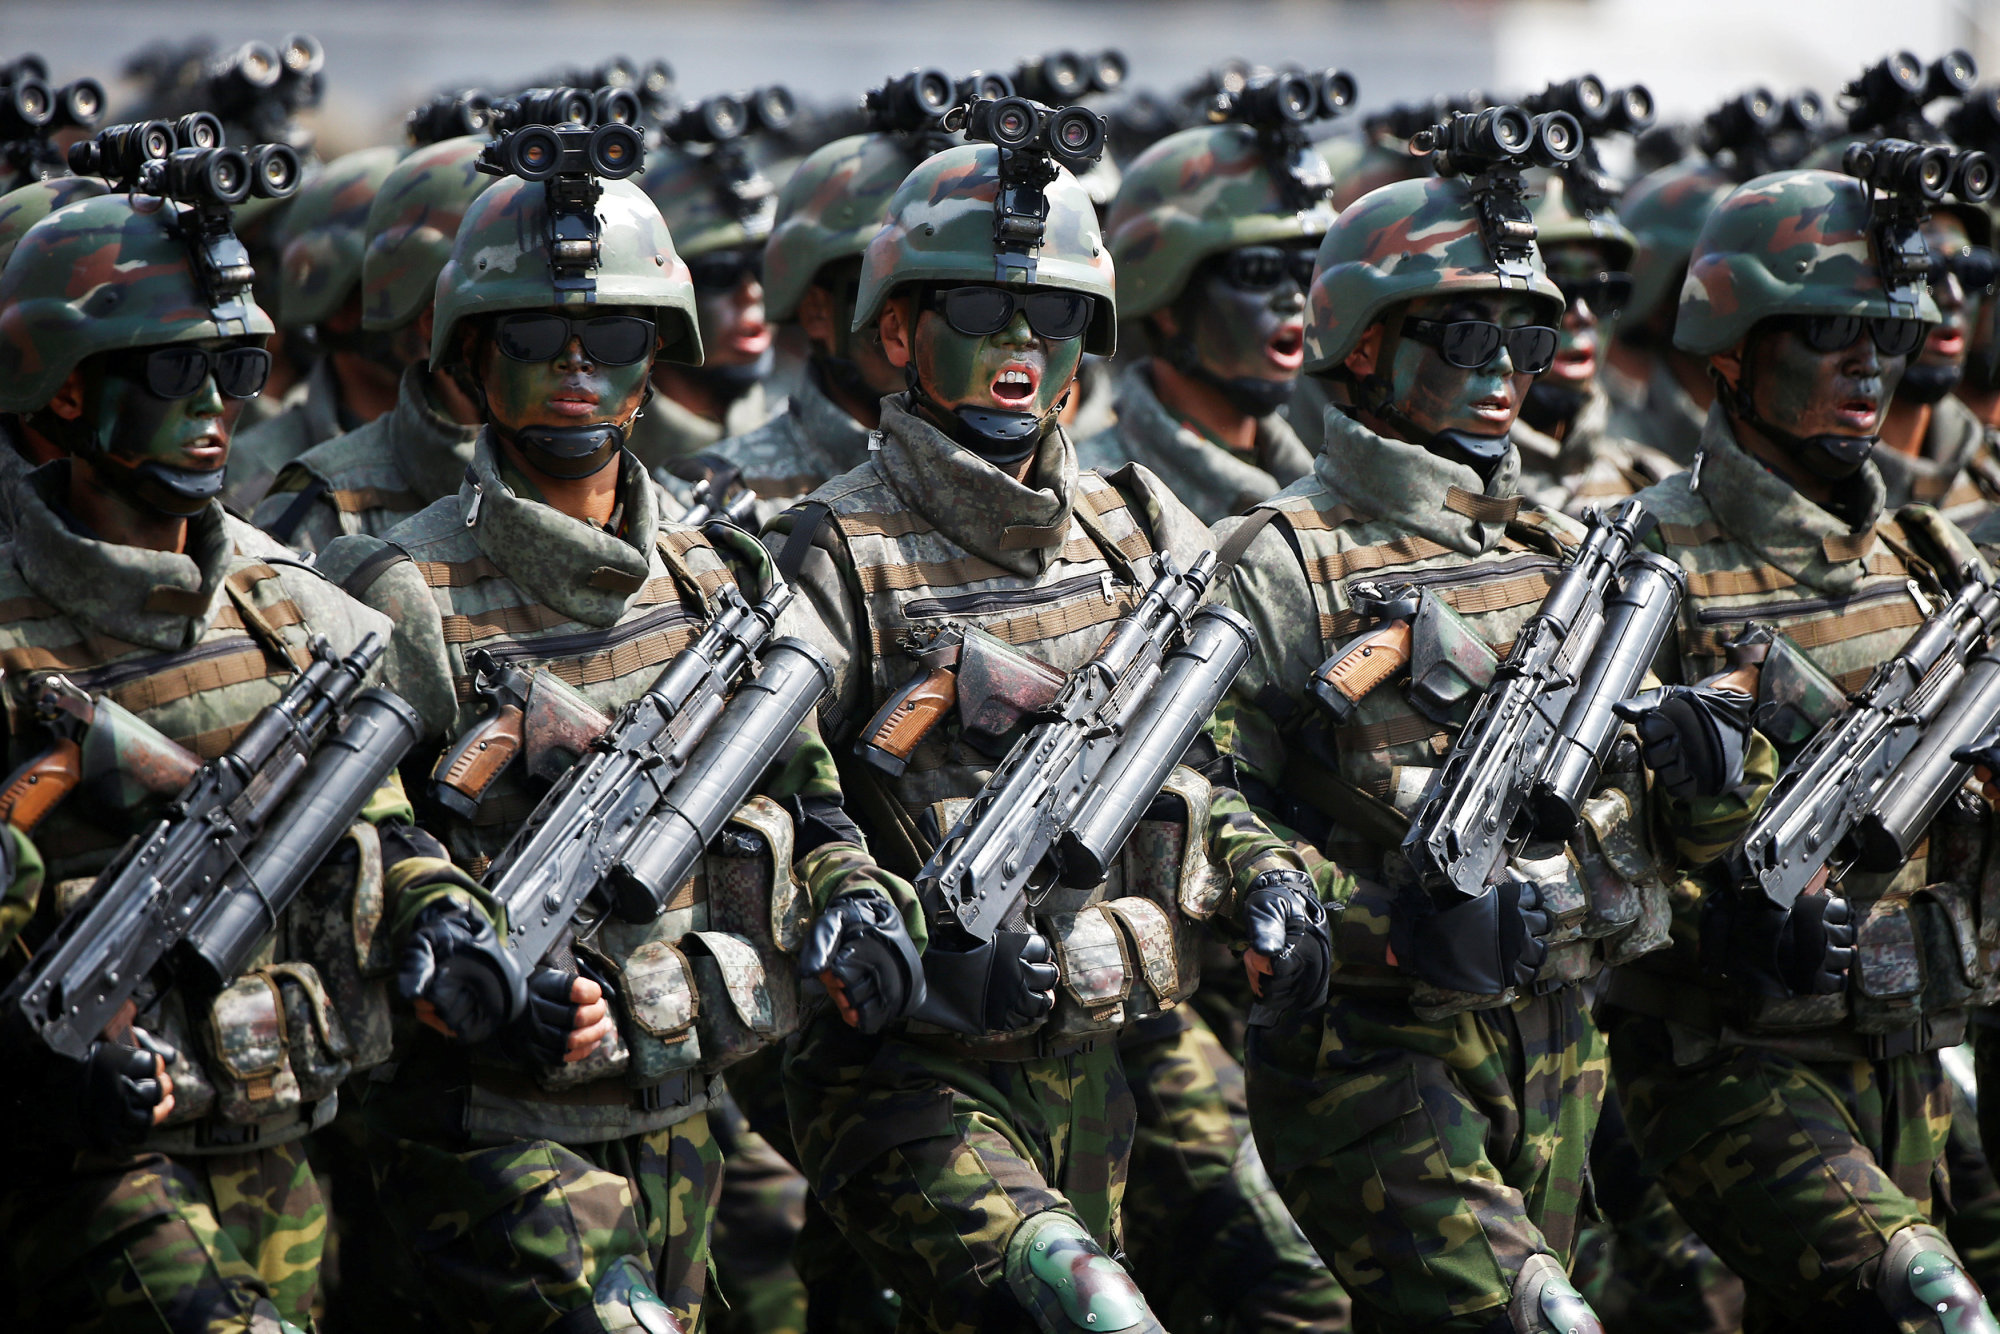 North Korean special forces soldiers march and shout slogans during a military parade marking the 105th anniversary of the birth of the country's founder, Kim Il Sung, in Pyongyang on April 15. | REUTERS